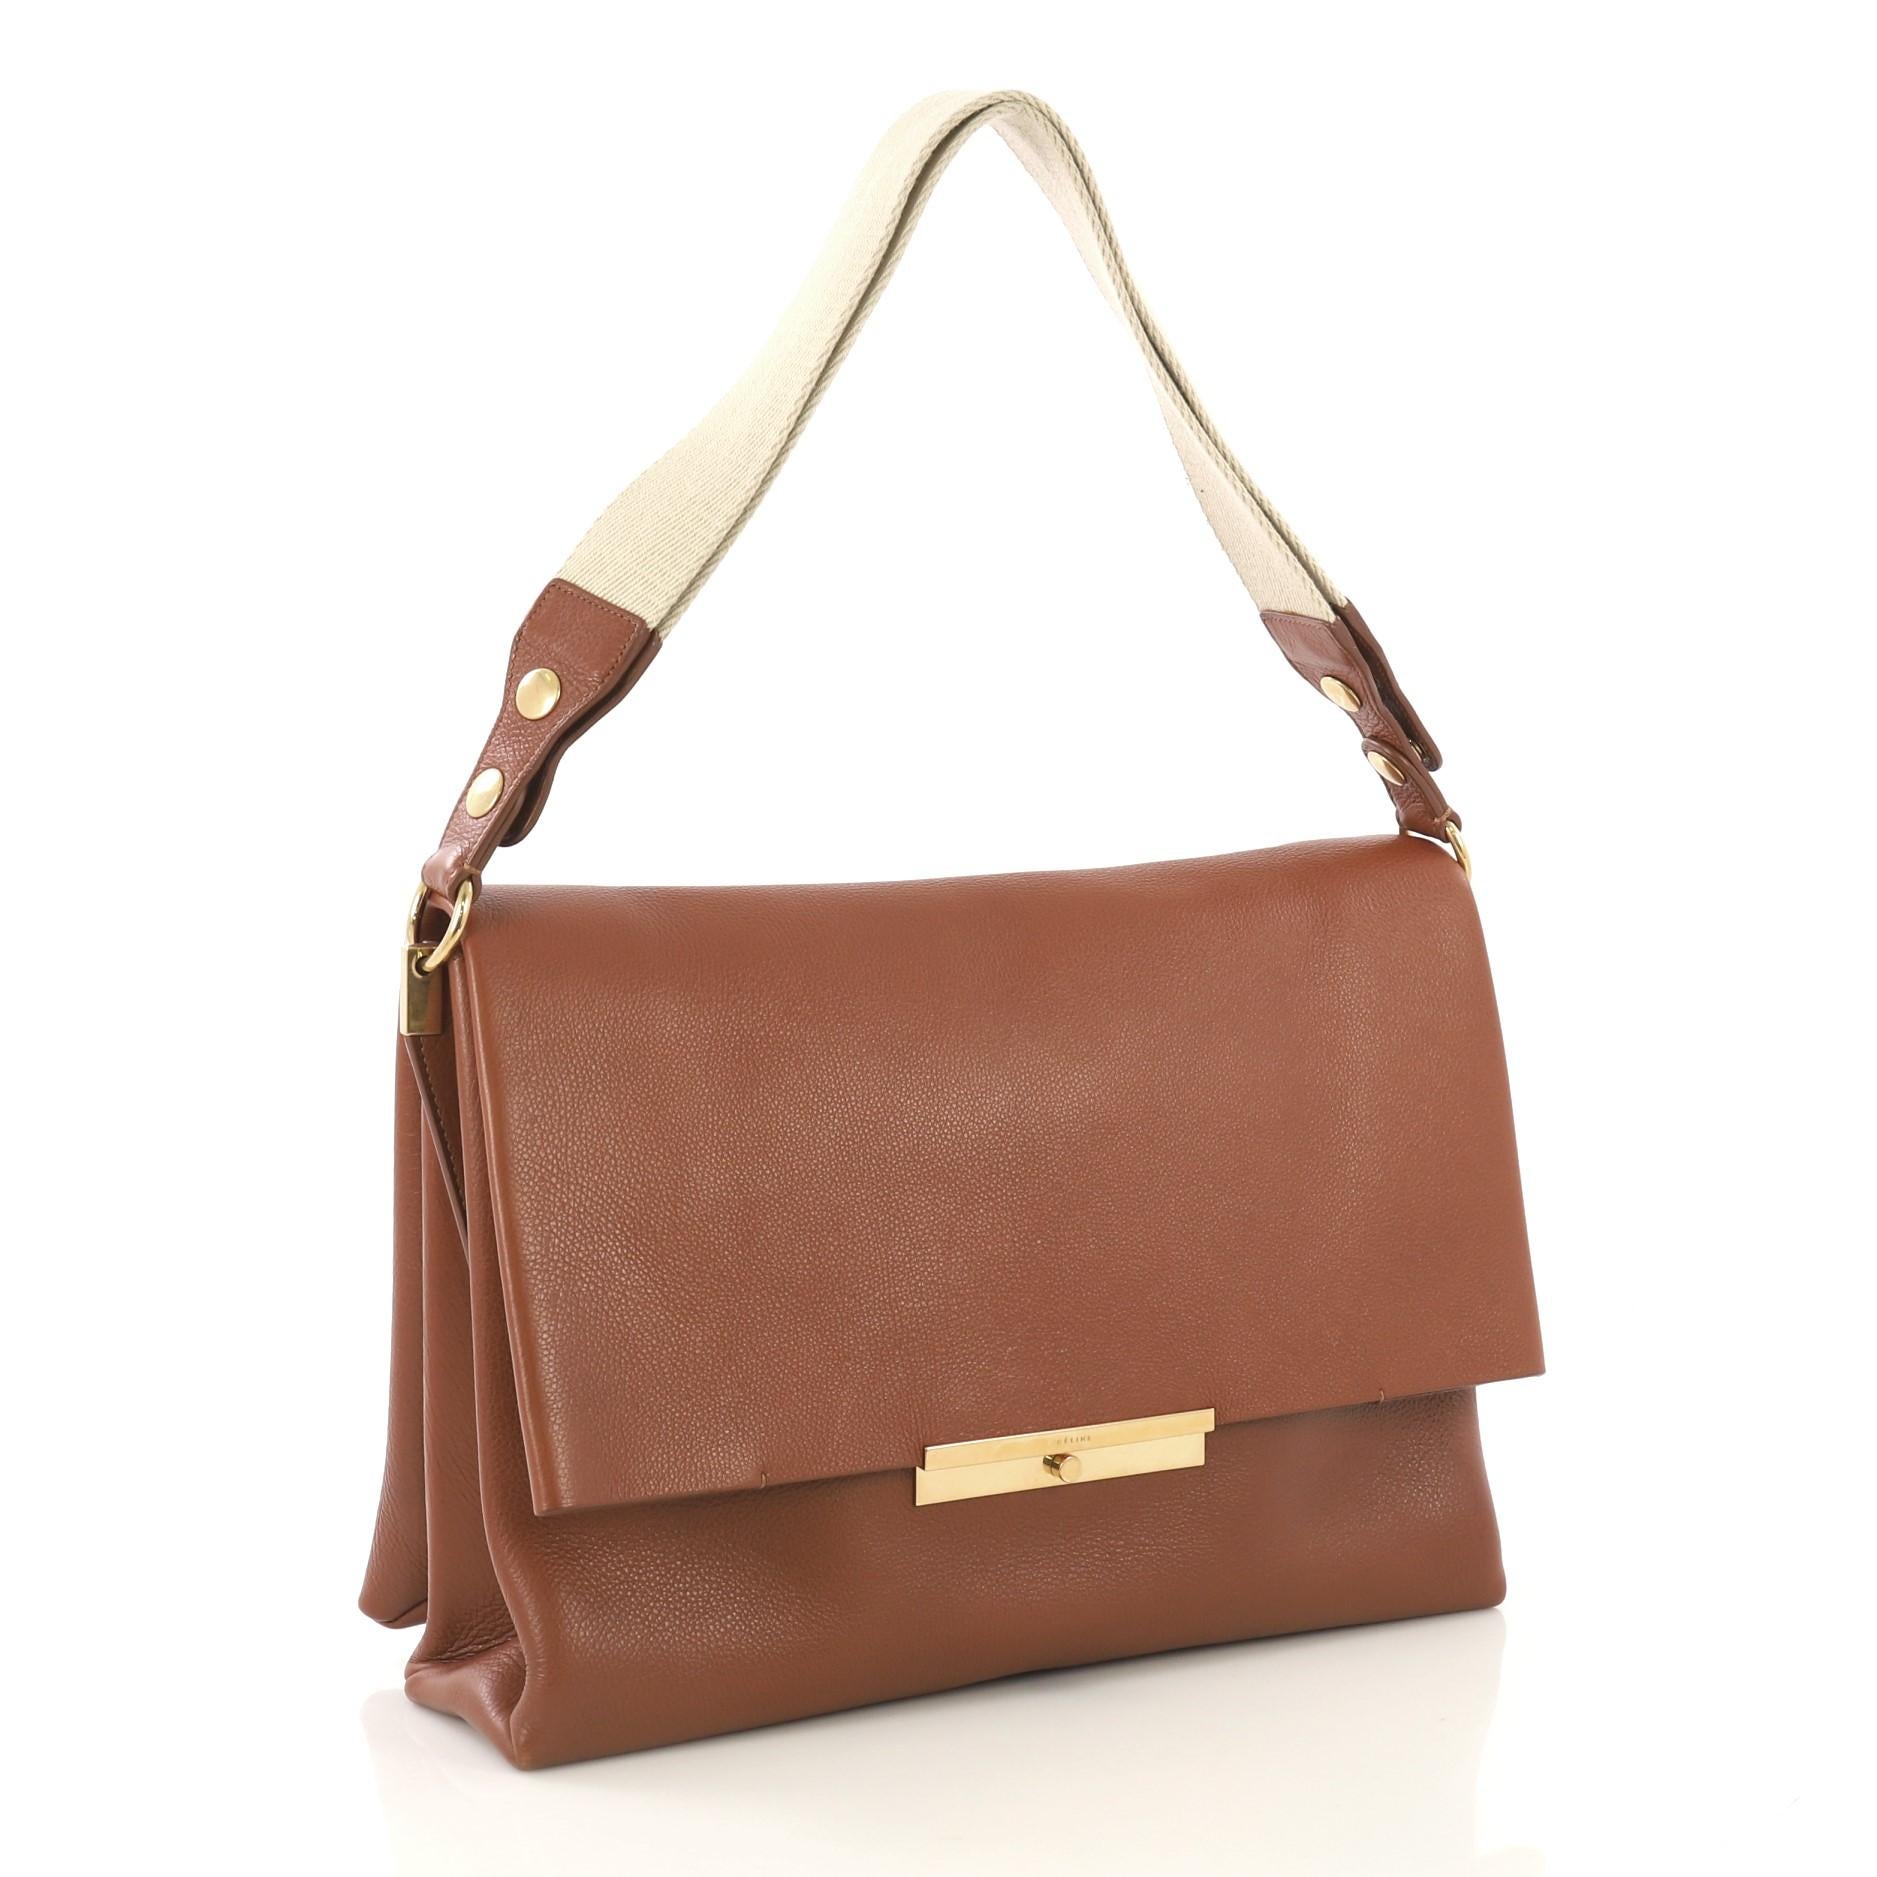 This Celine Blade Shoulder Bag Leather, crafted in brown leather, features a flat canvas shoulder strap with button snaps that lengthen the strap and gold-tone hardware. The flap opens to a brown suede interior divided into two spacious open